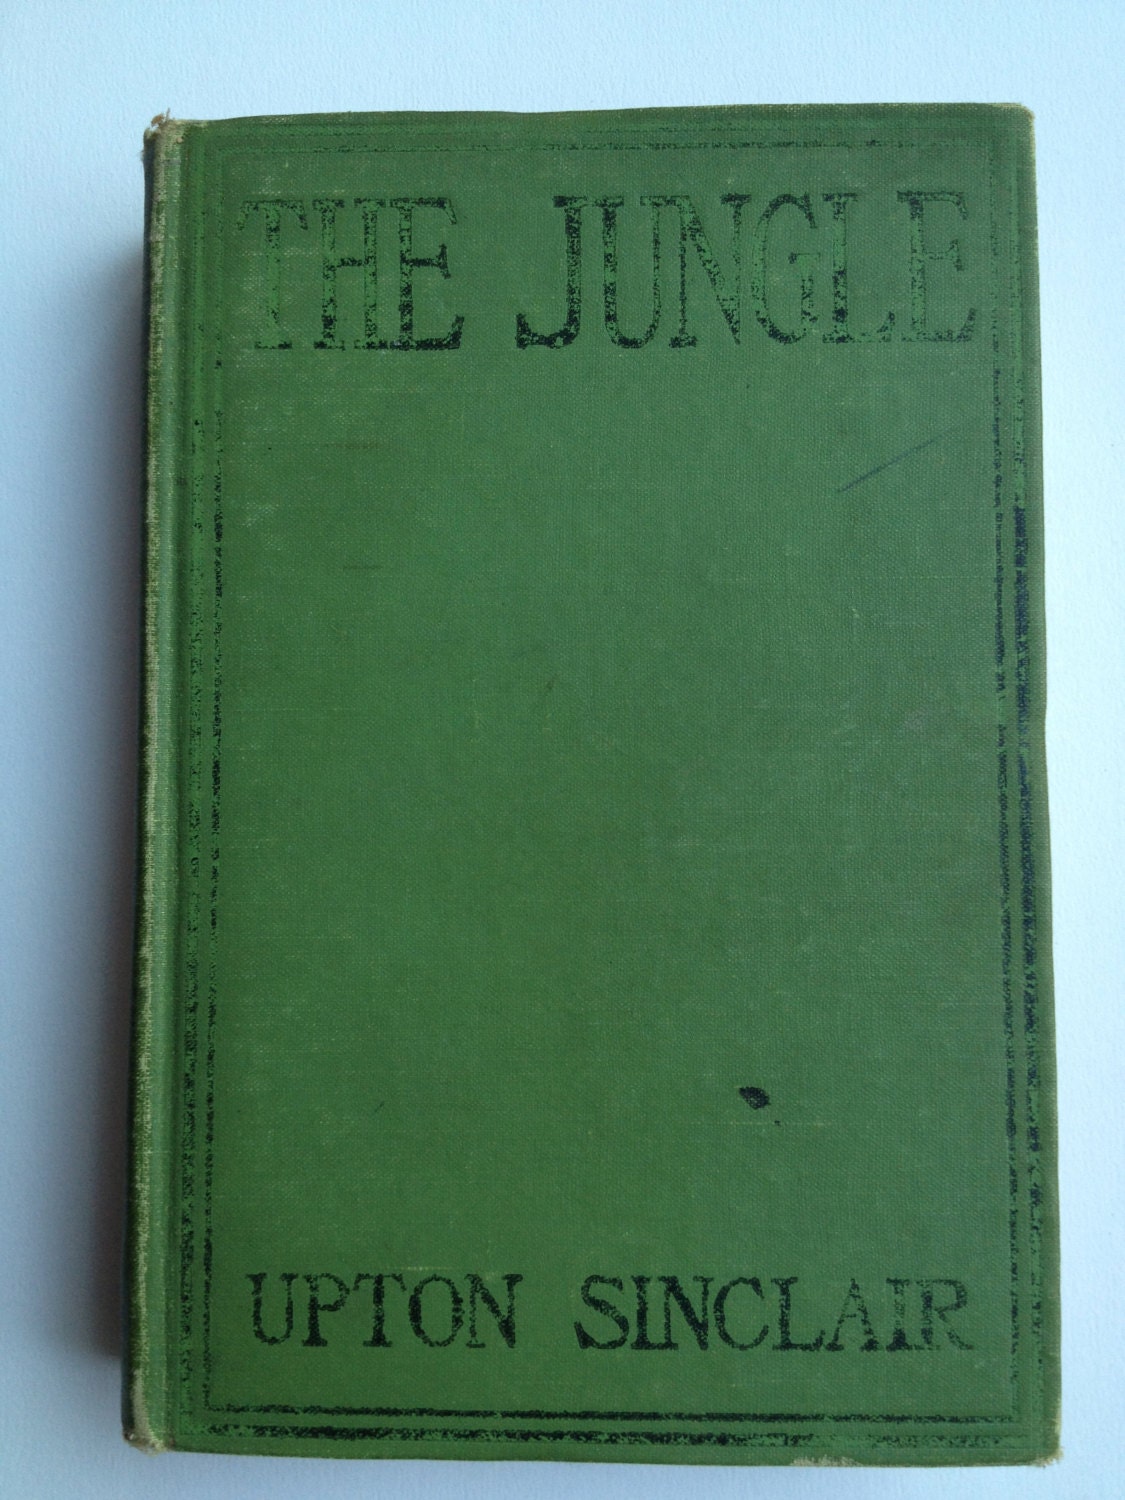 the jungle written by upton sinclair